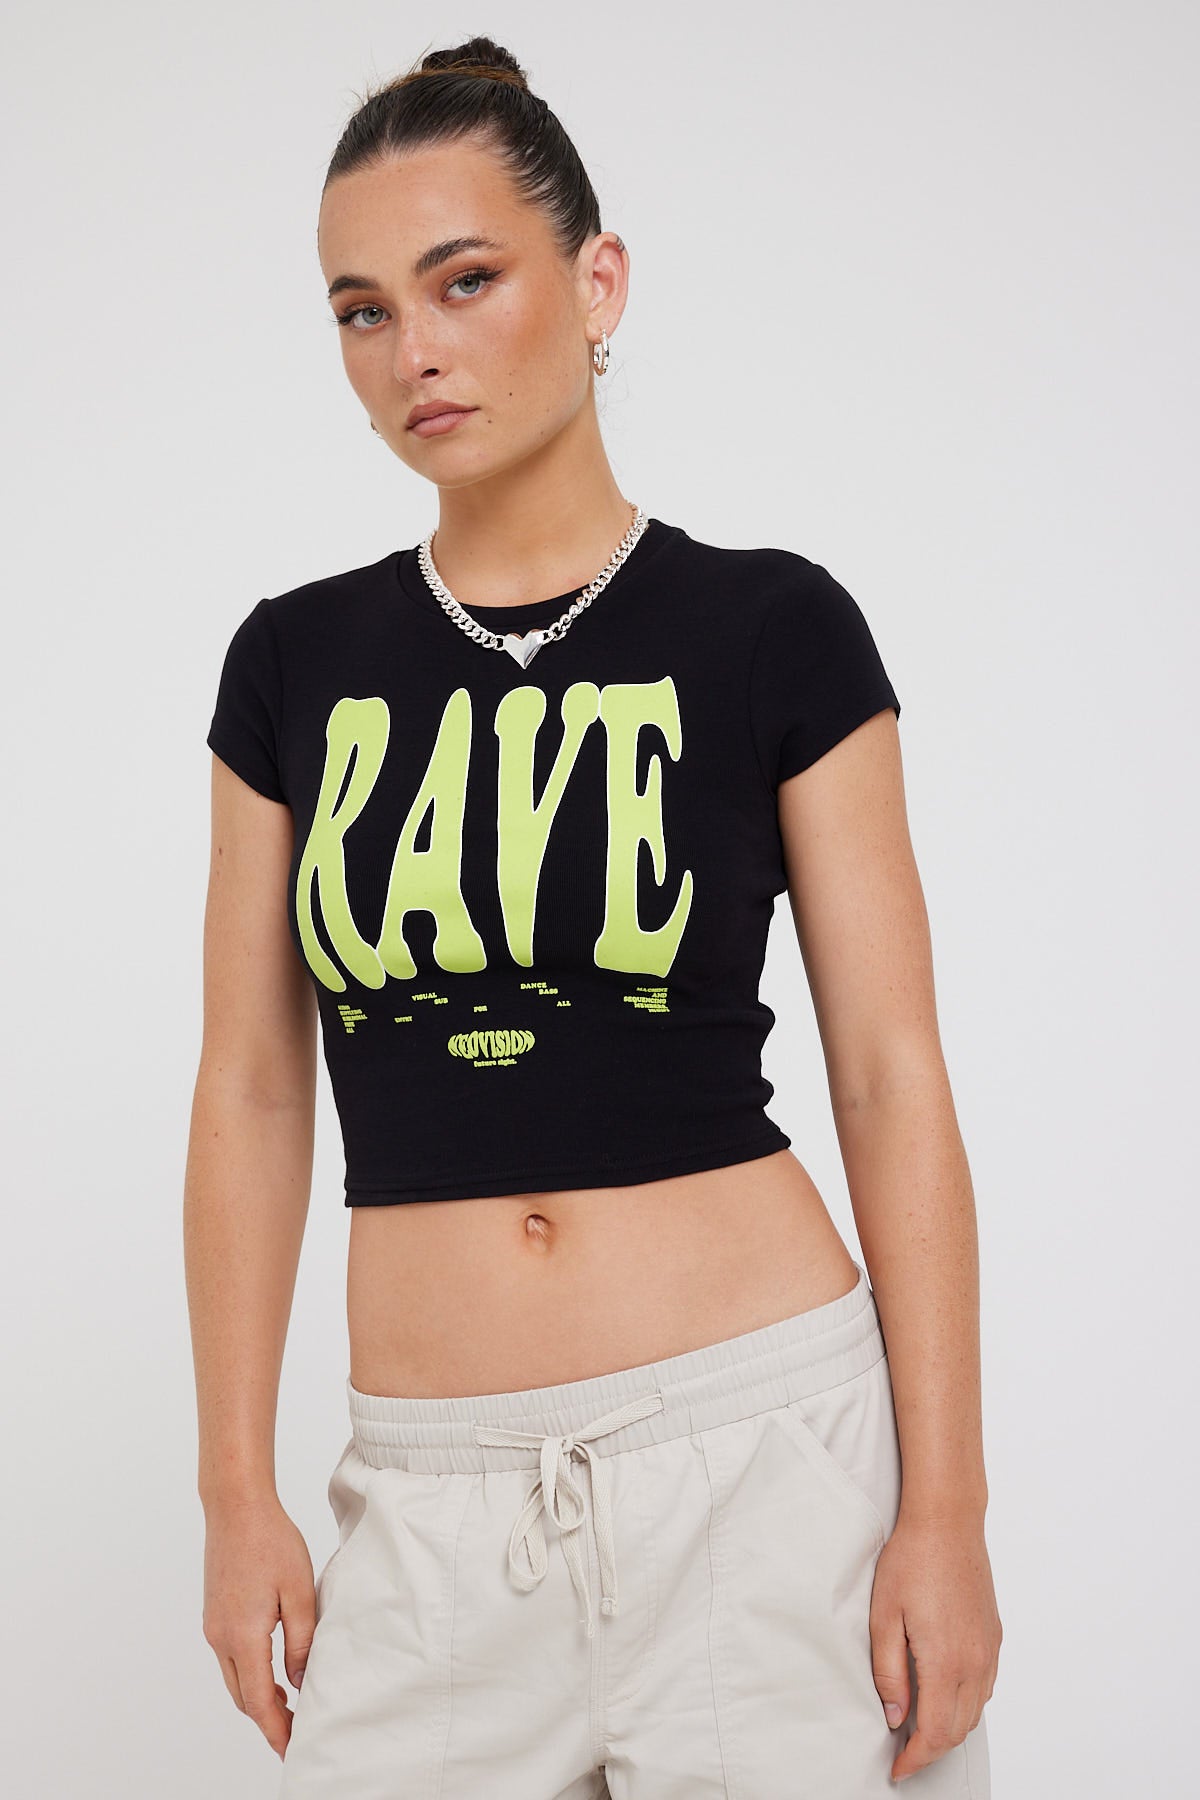 Neovision Rave Glow In The Dark Mid Length Baby Tee Black